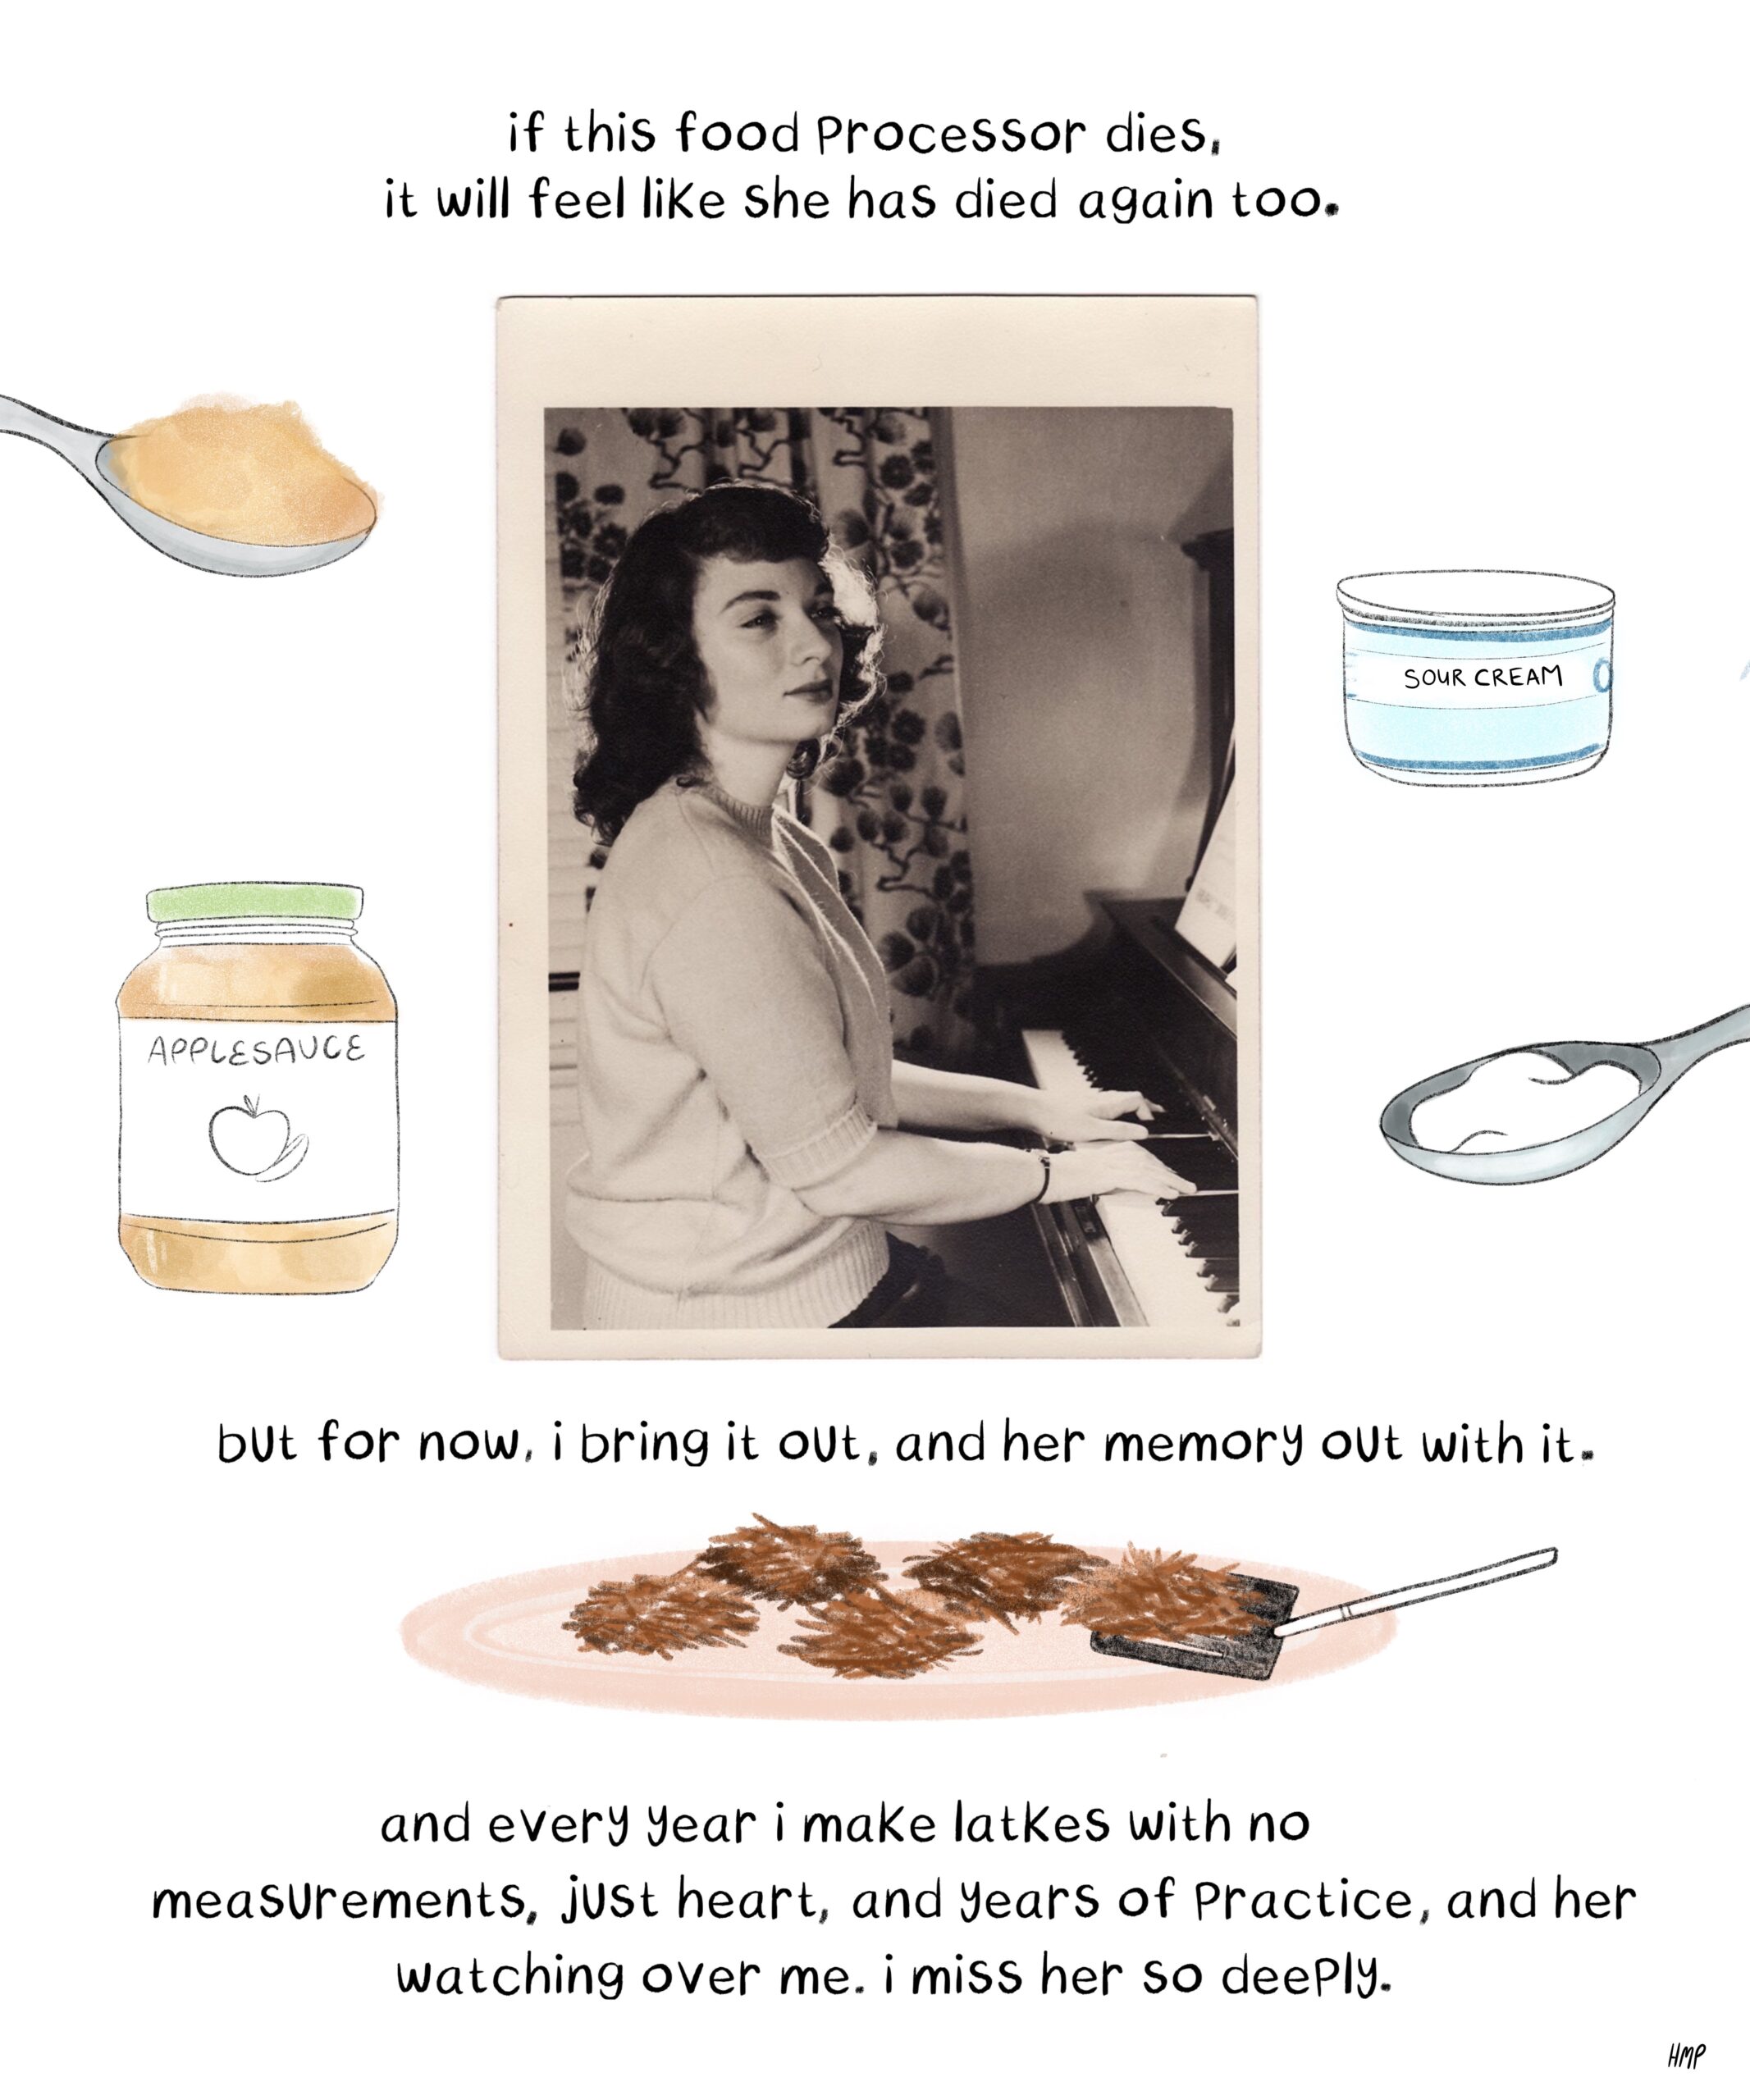 A photo of Bubbie, surrounded by drawings of sour cream, apple sauce and latkes on a tray. The text reads, "If this food processor dies, it will feel like she has died again too. But for now, I bring it out, and her memory out with it. And every year I make latkes with no measurements, just heart, and years f practice, and her watching over me. I miss her so deeply.